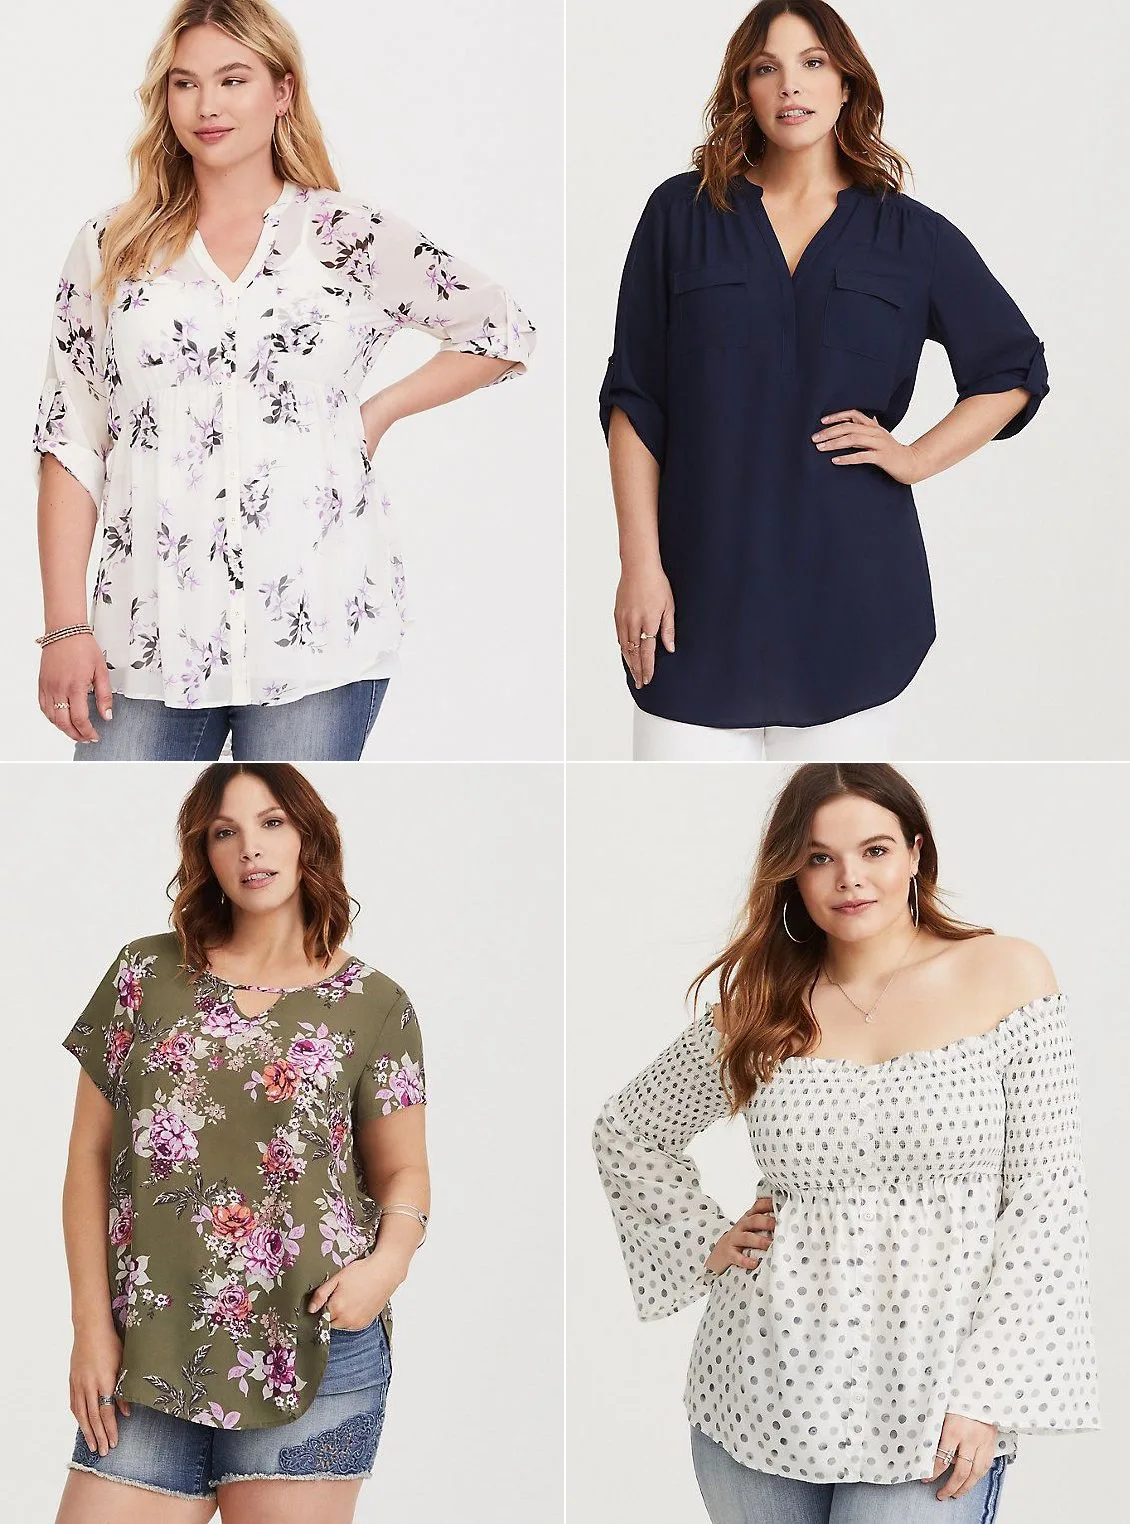 Where to shop for stylish and trendy plus size clothing - click through for all @cydconverse's favorite places to shop! | Torrid Review